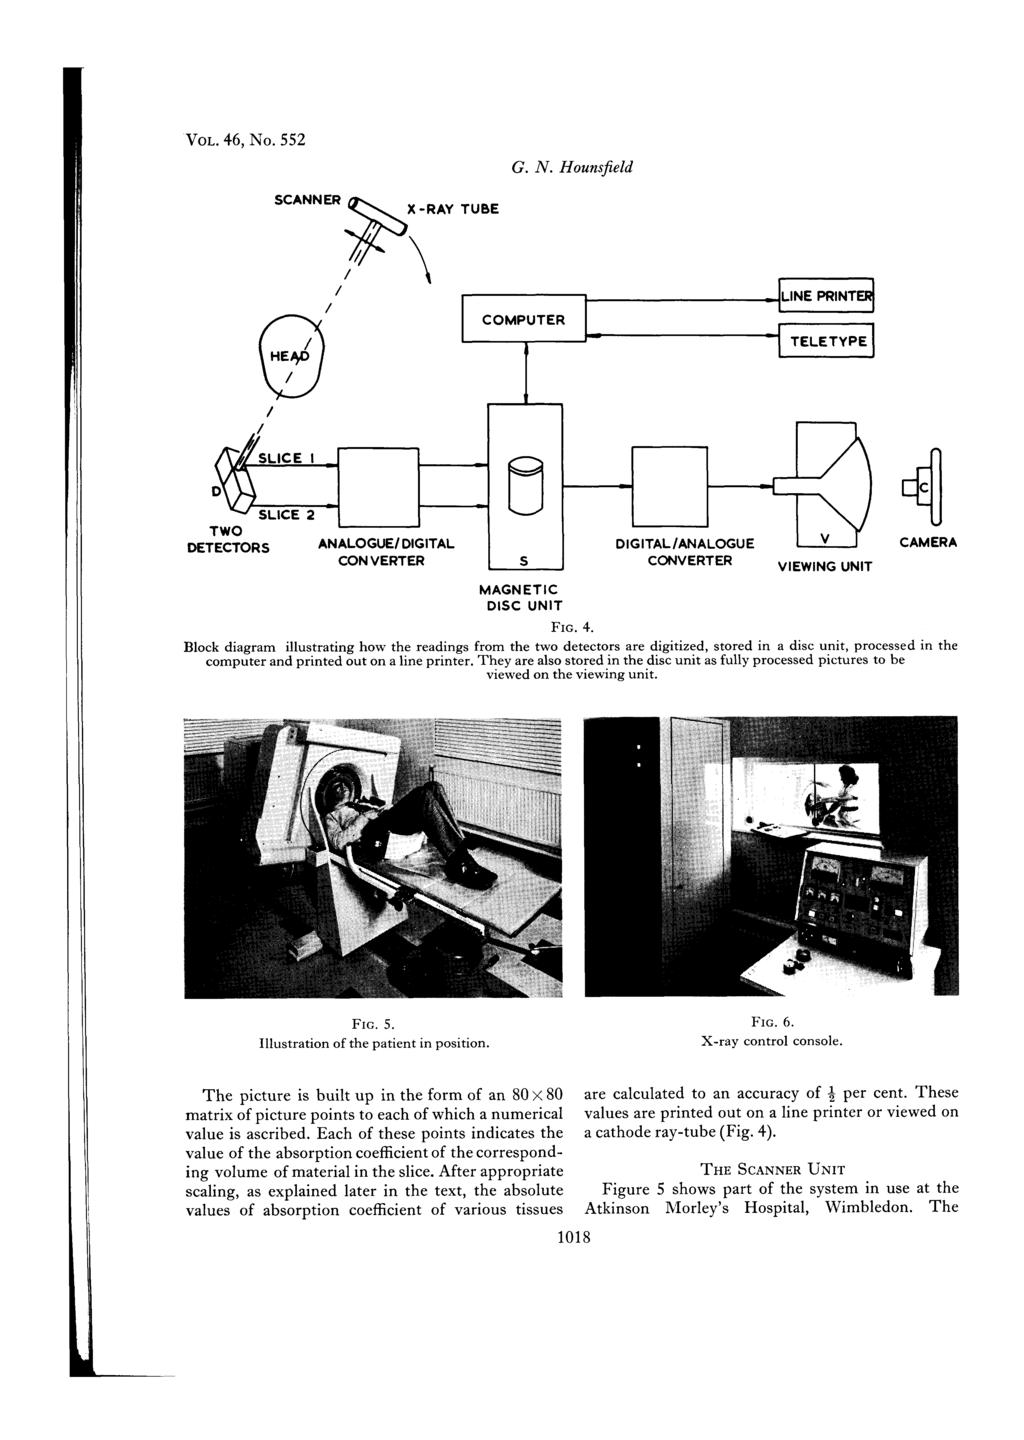 VOL. 46, No. 552 SCANNER X-RAY TUBE TWO DETECTORS SLICE 2 ANALOGUE/ DIGITAL CONVERTER MAGNETIC DISC UNIT DIGITAL/ANALOGUE CONVERTER VIEWING UNIT CAMERA FIG. 4. Block diagram illustrating how the readings from the two detectors are digitized, stored in a disc unit, processed in the computer and printed out on a line printer.